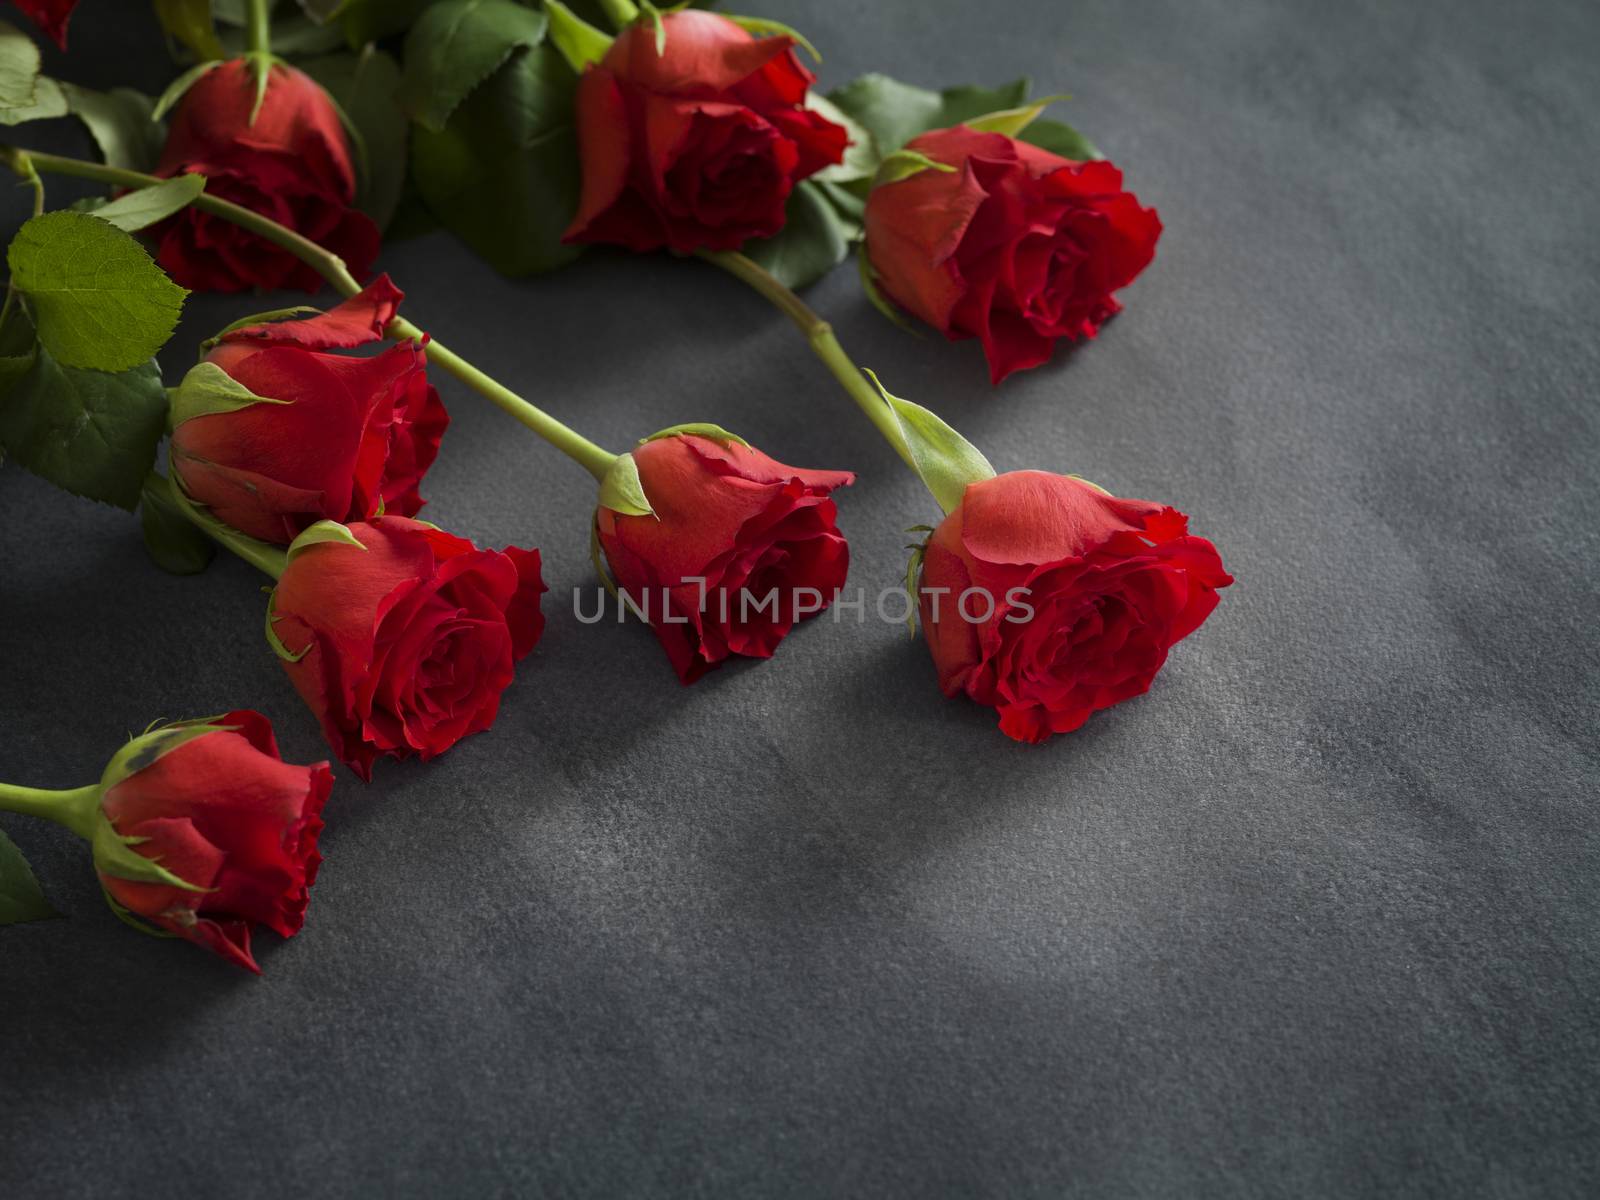 condolence card with Red Roses on grey background by janssenkruseproductions